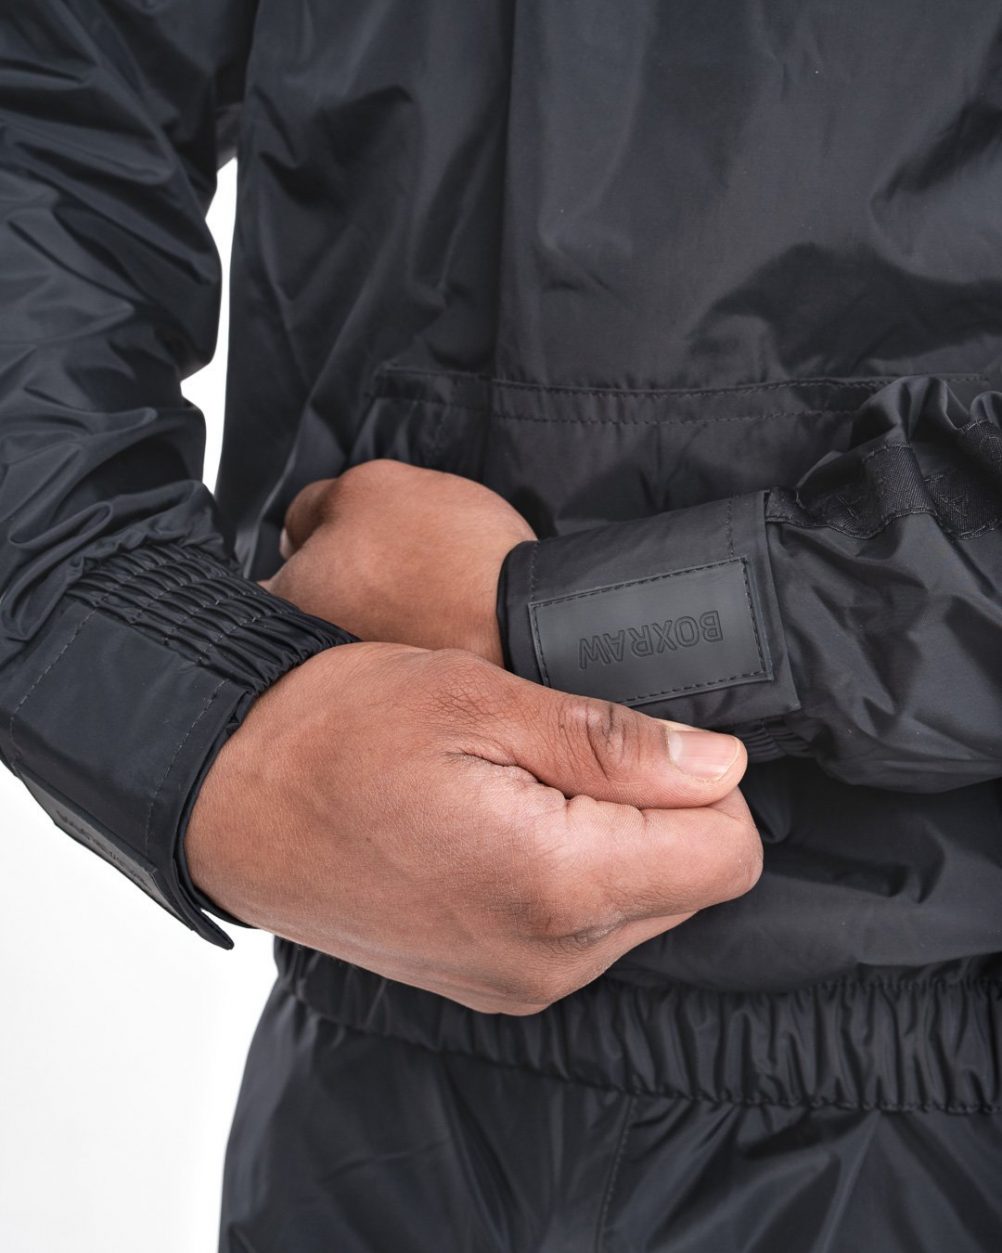 BOXRAW Hagler Boxing Sauna Suit Available in Charcoal and Other Colors